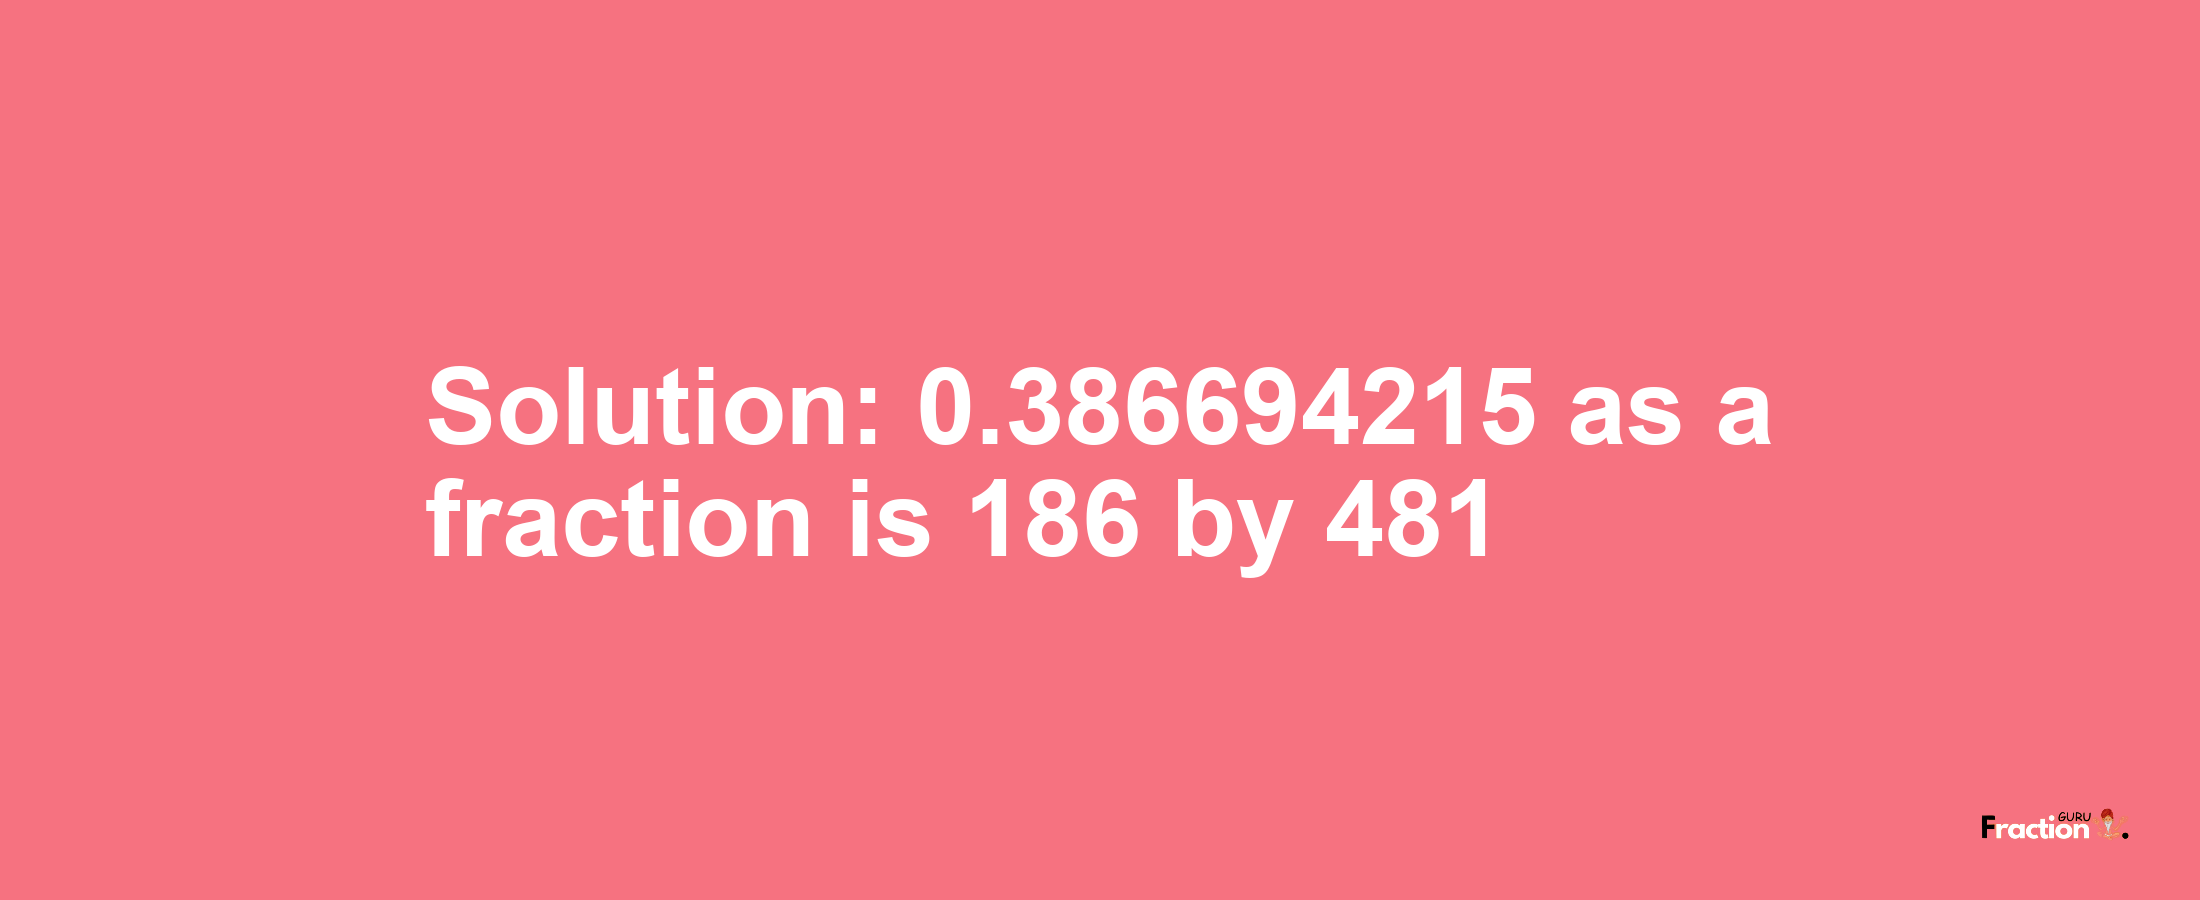 Solution:0.386694215 as a fraction is 186/481